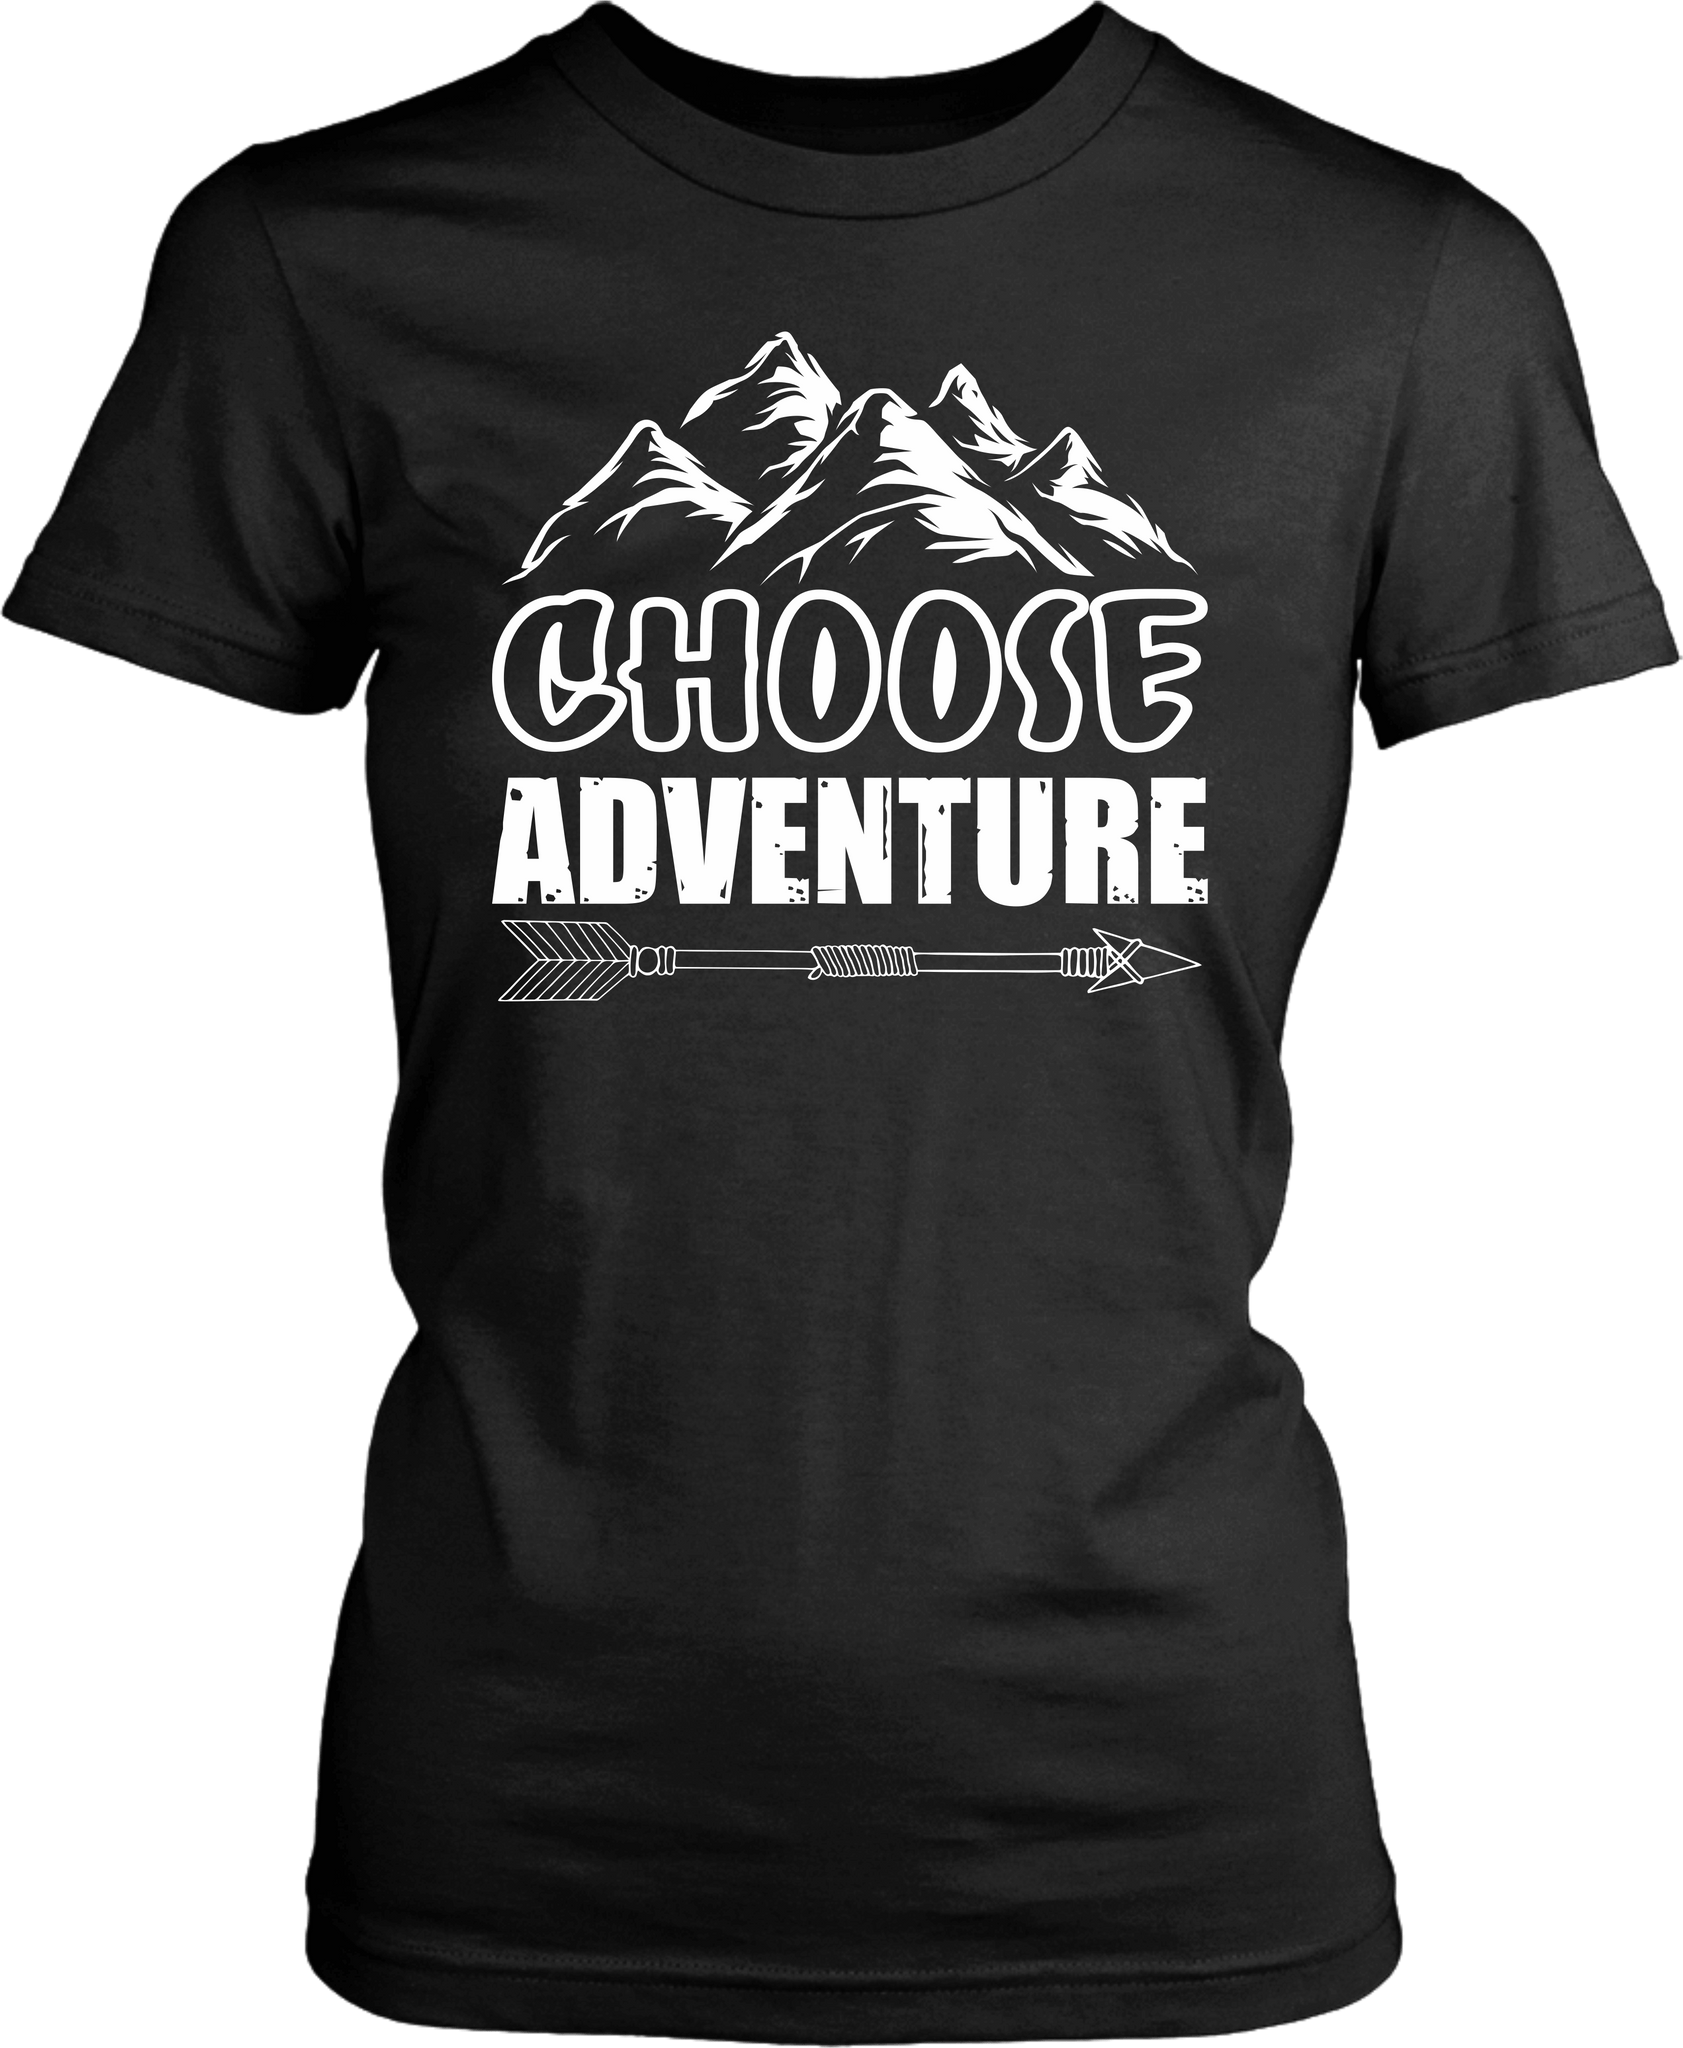 Black female form t-shirt mock-up with Choose Adventure design on the front, available from the Xpert Apparel Store.